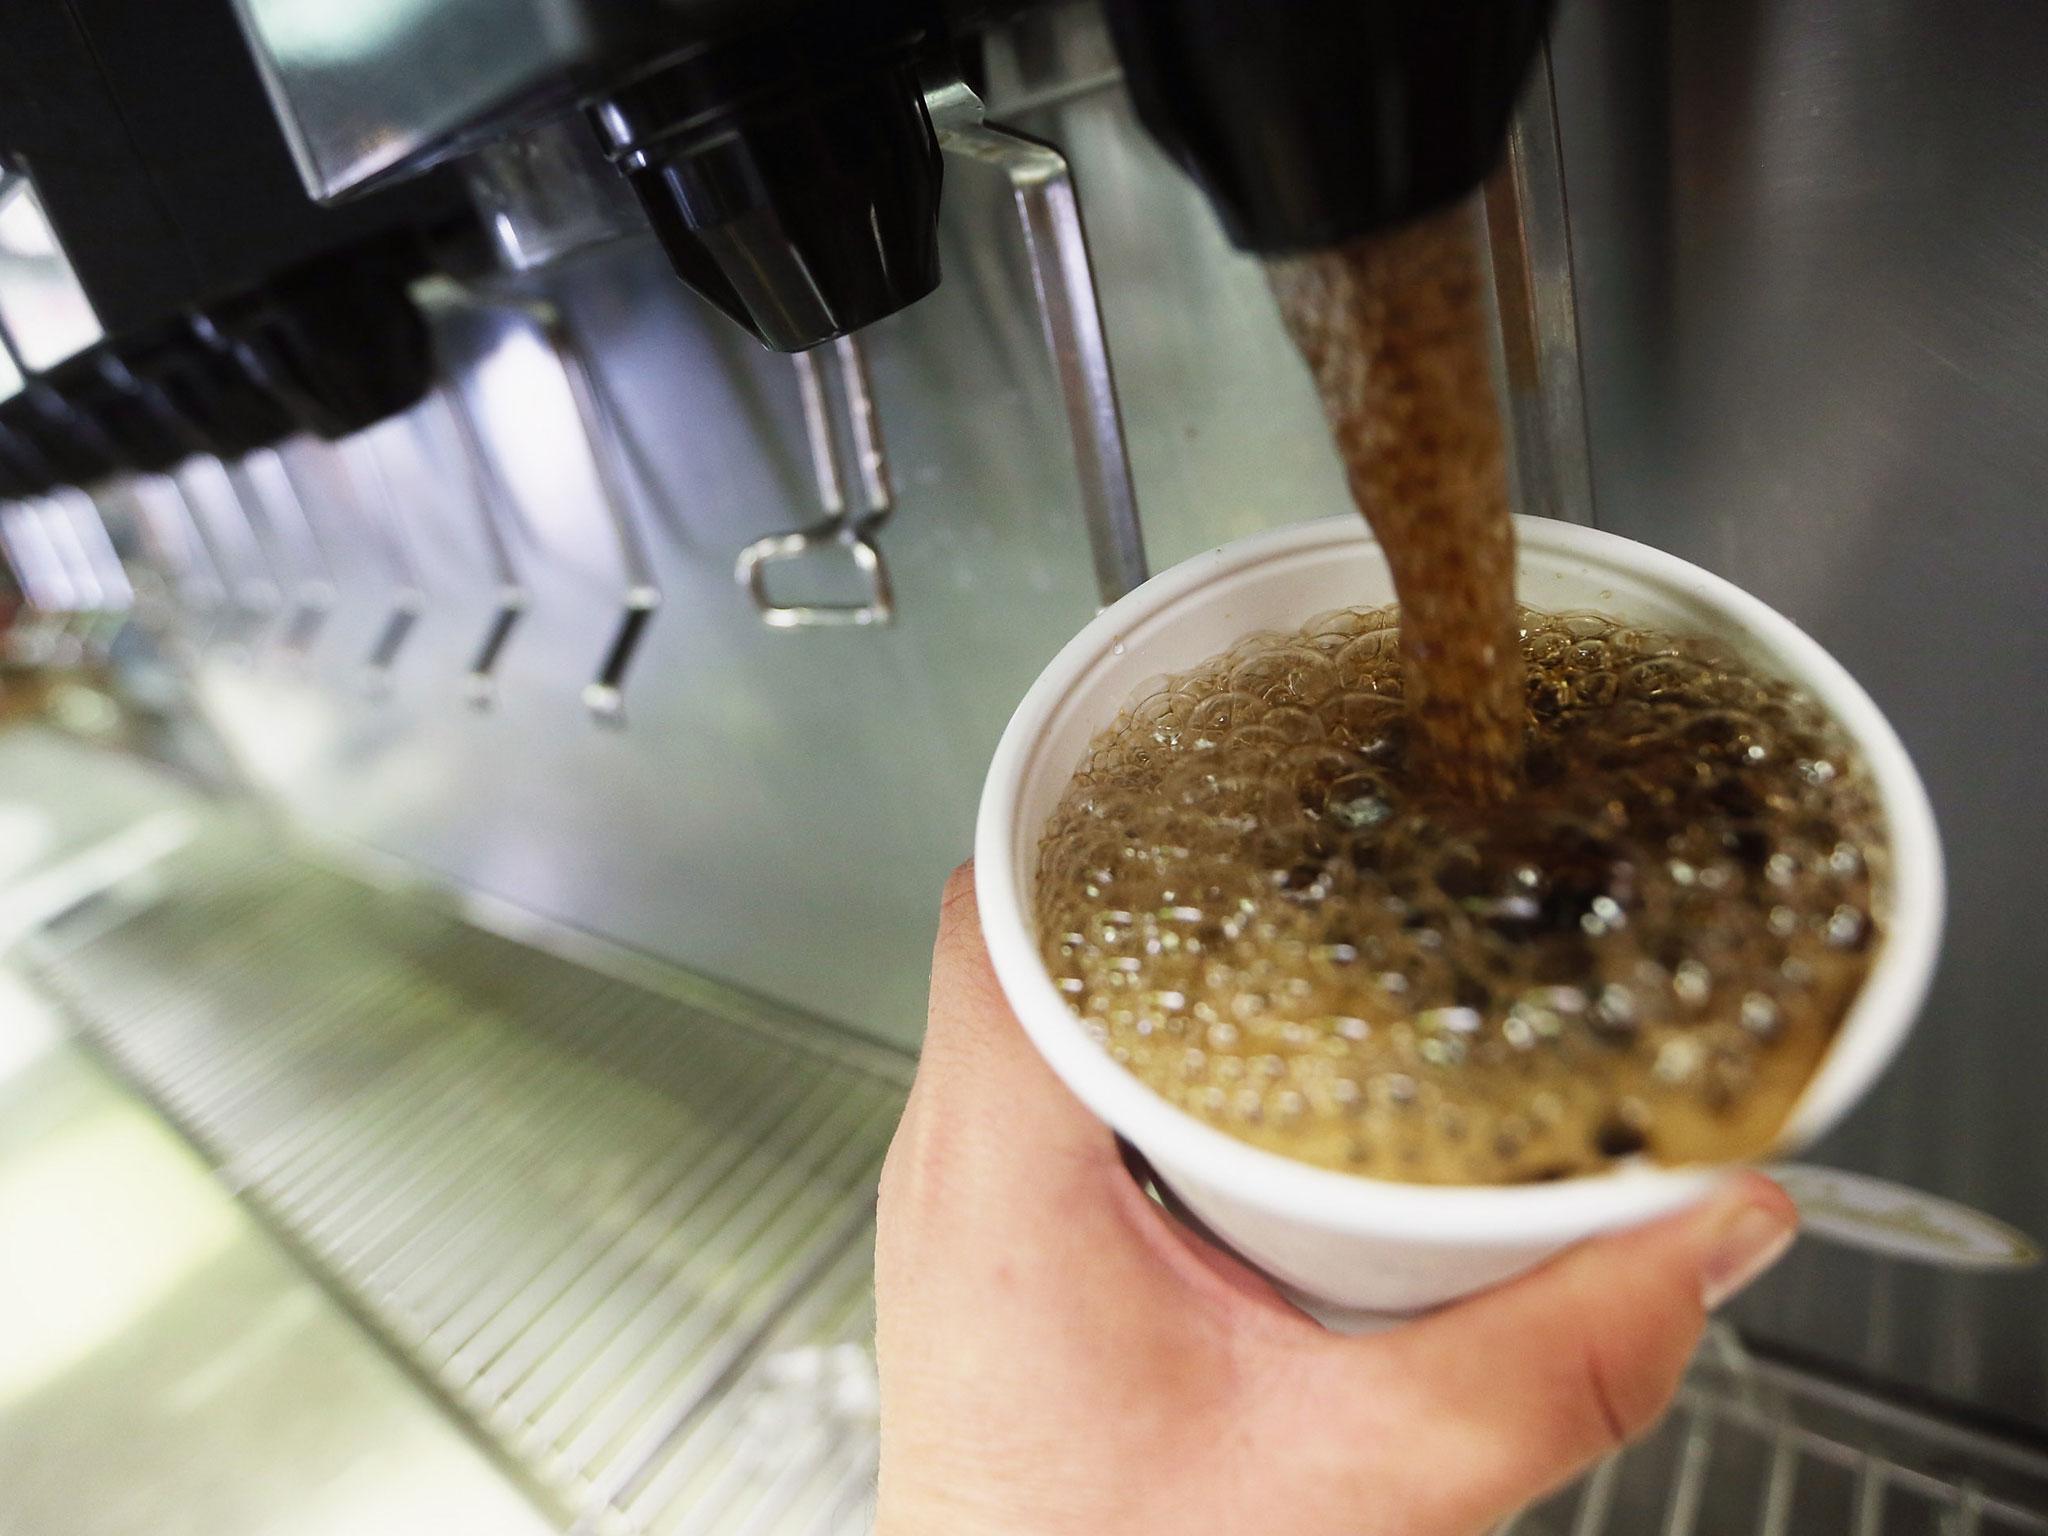 Experts agree that most fizzy drinks have no nutritional value